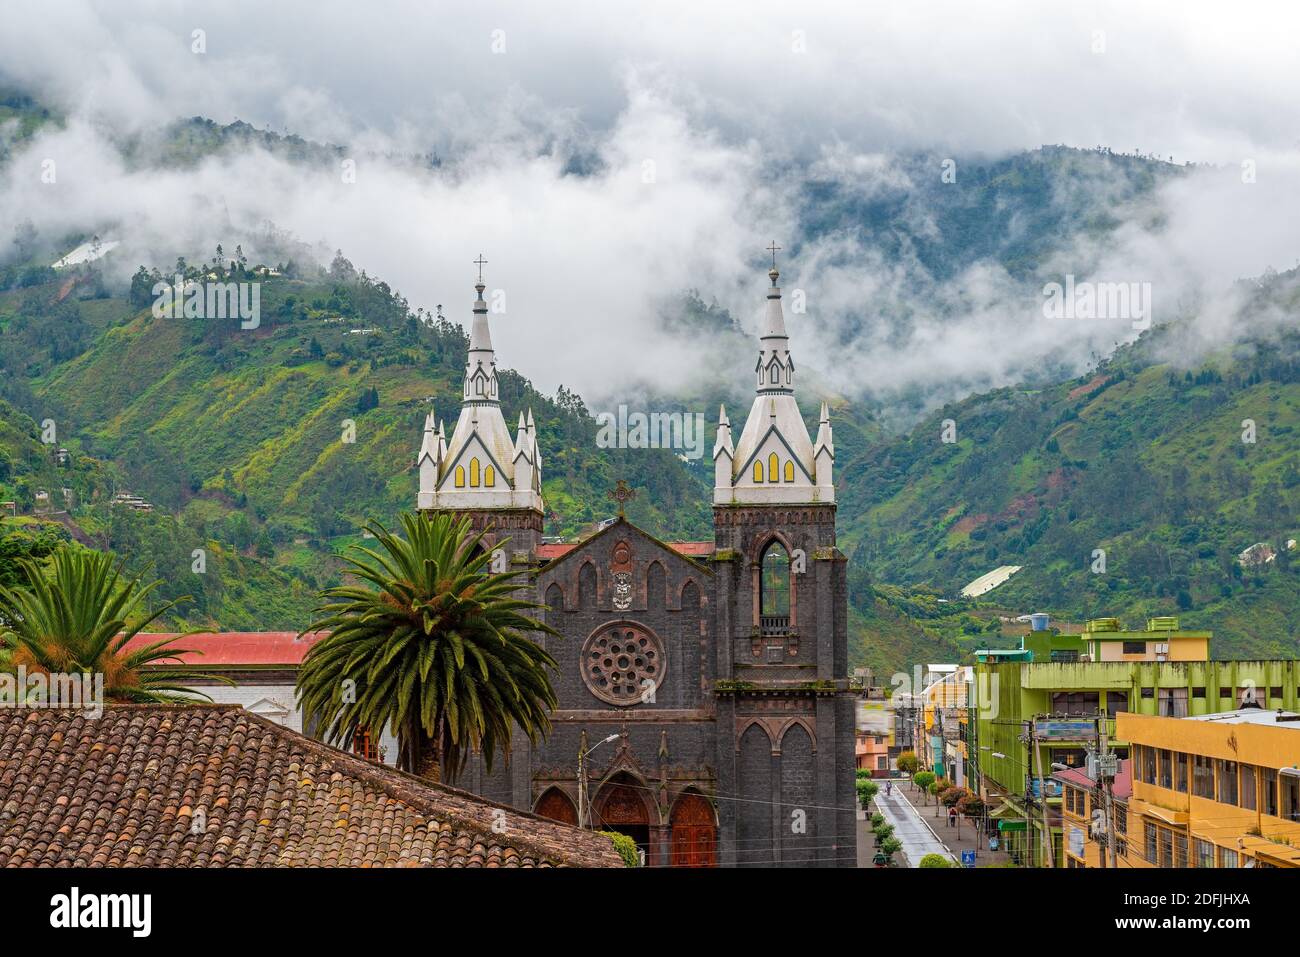 Aerial cityscape of Banos de Agua Santa located in the cloud forest with the bell towers of the Holy Water Virgin Church, Ecuador. Stock Photo